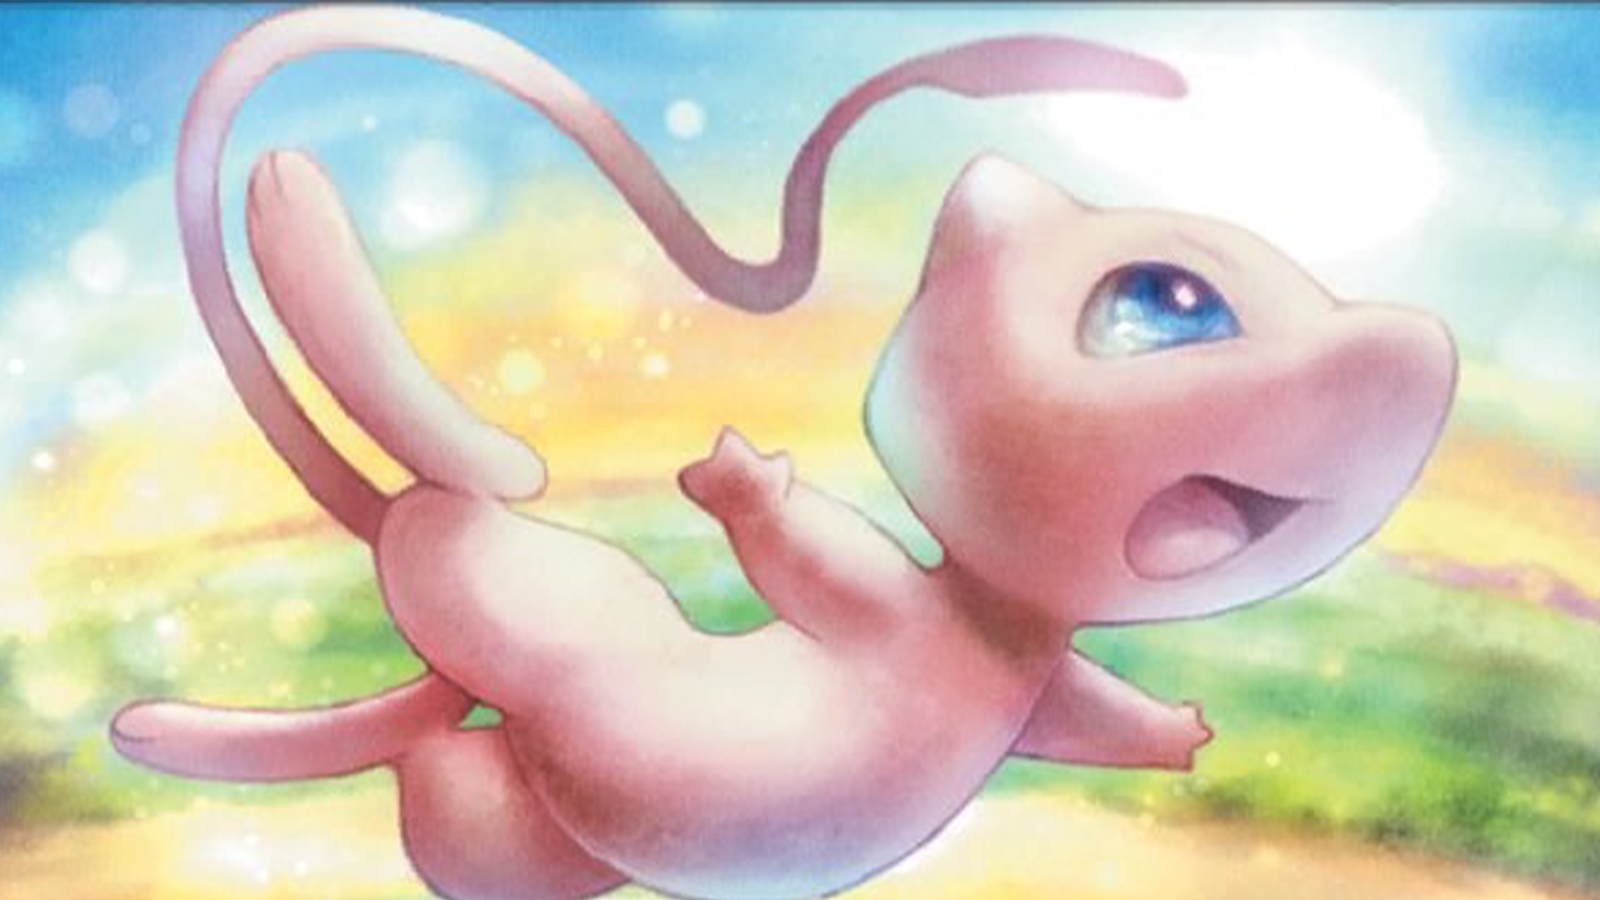 Best Mew PvP build in Pokemon Scarlet and Violet: Nature, moves